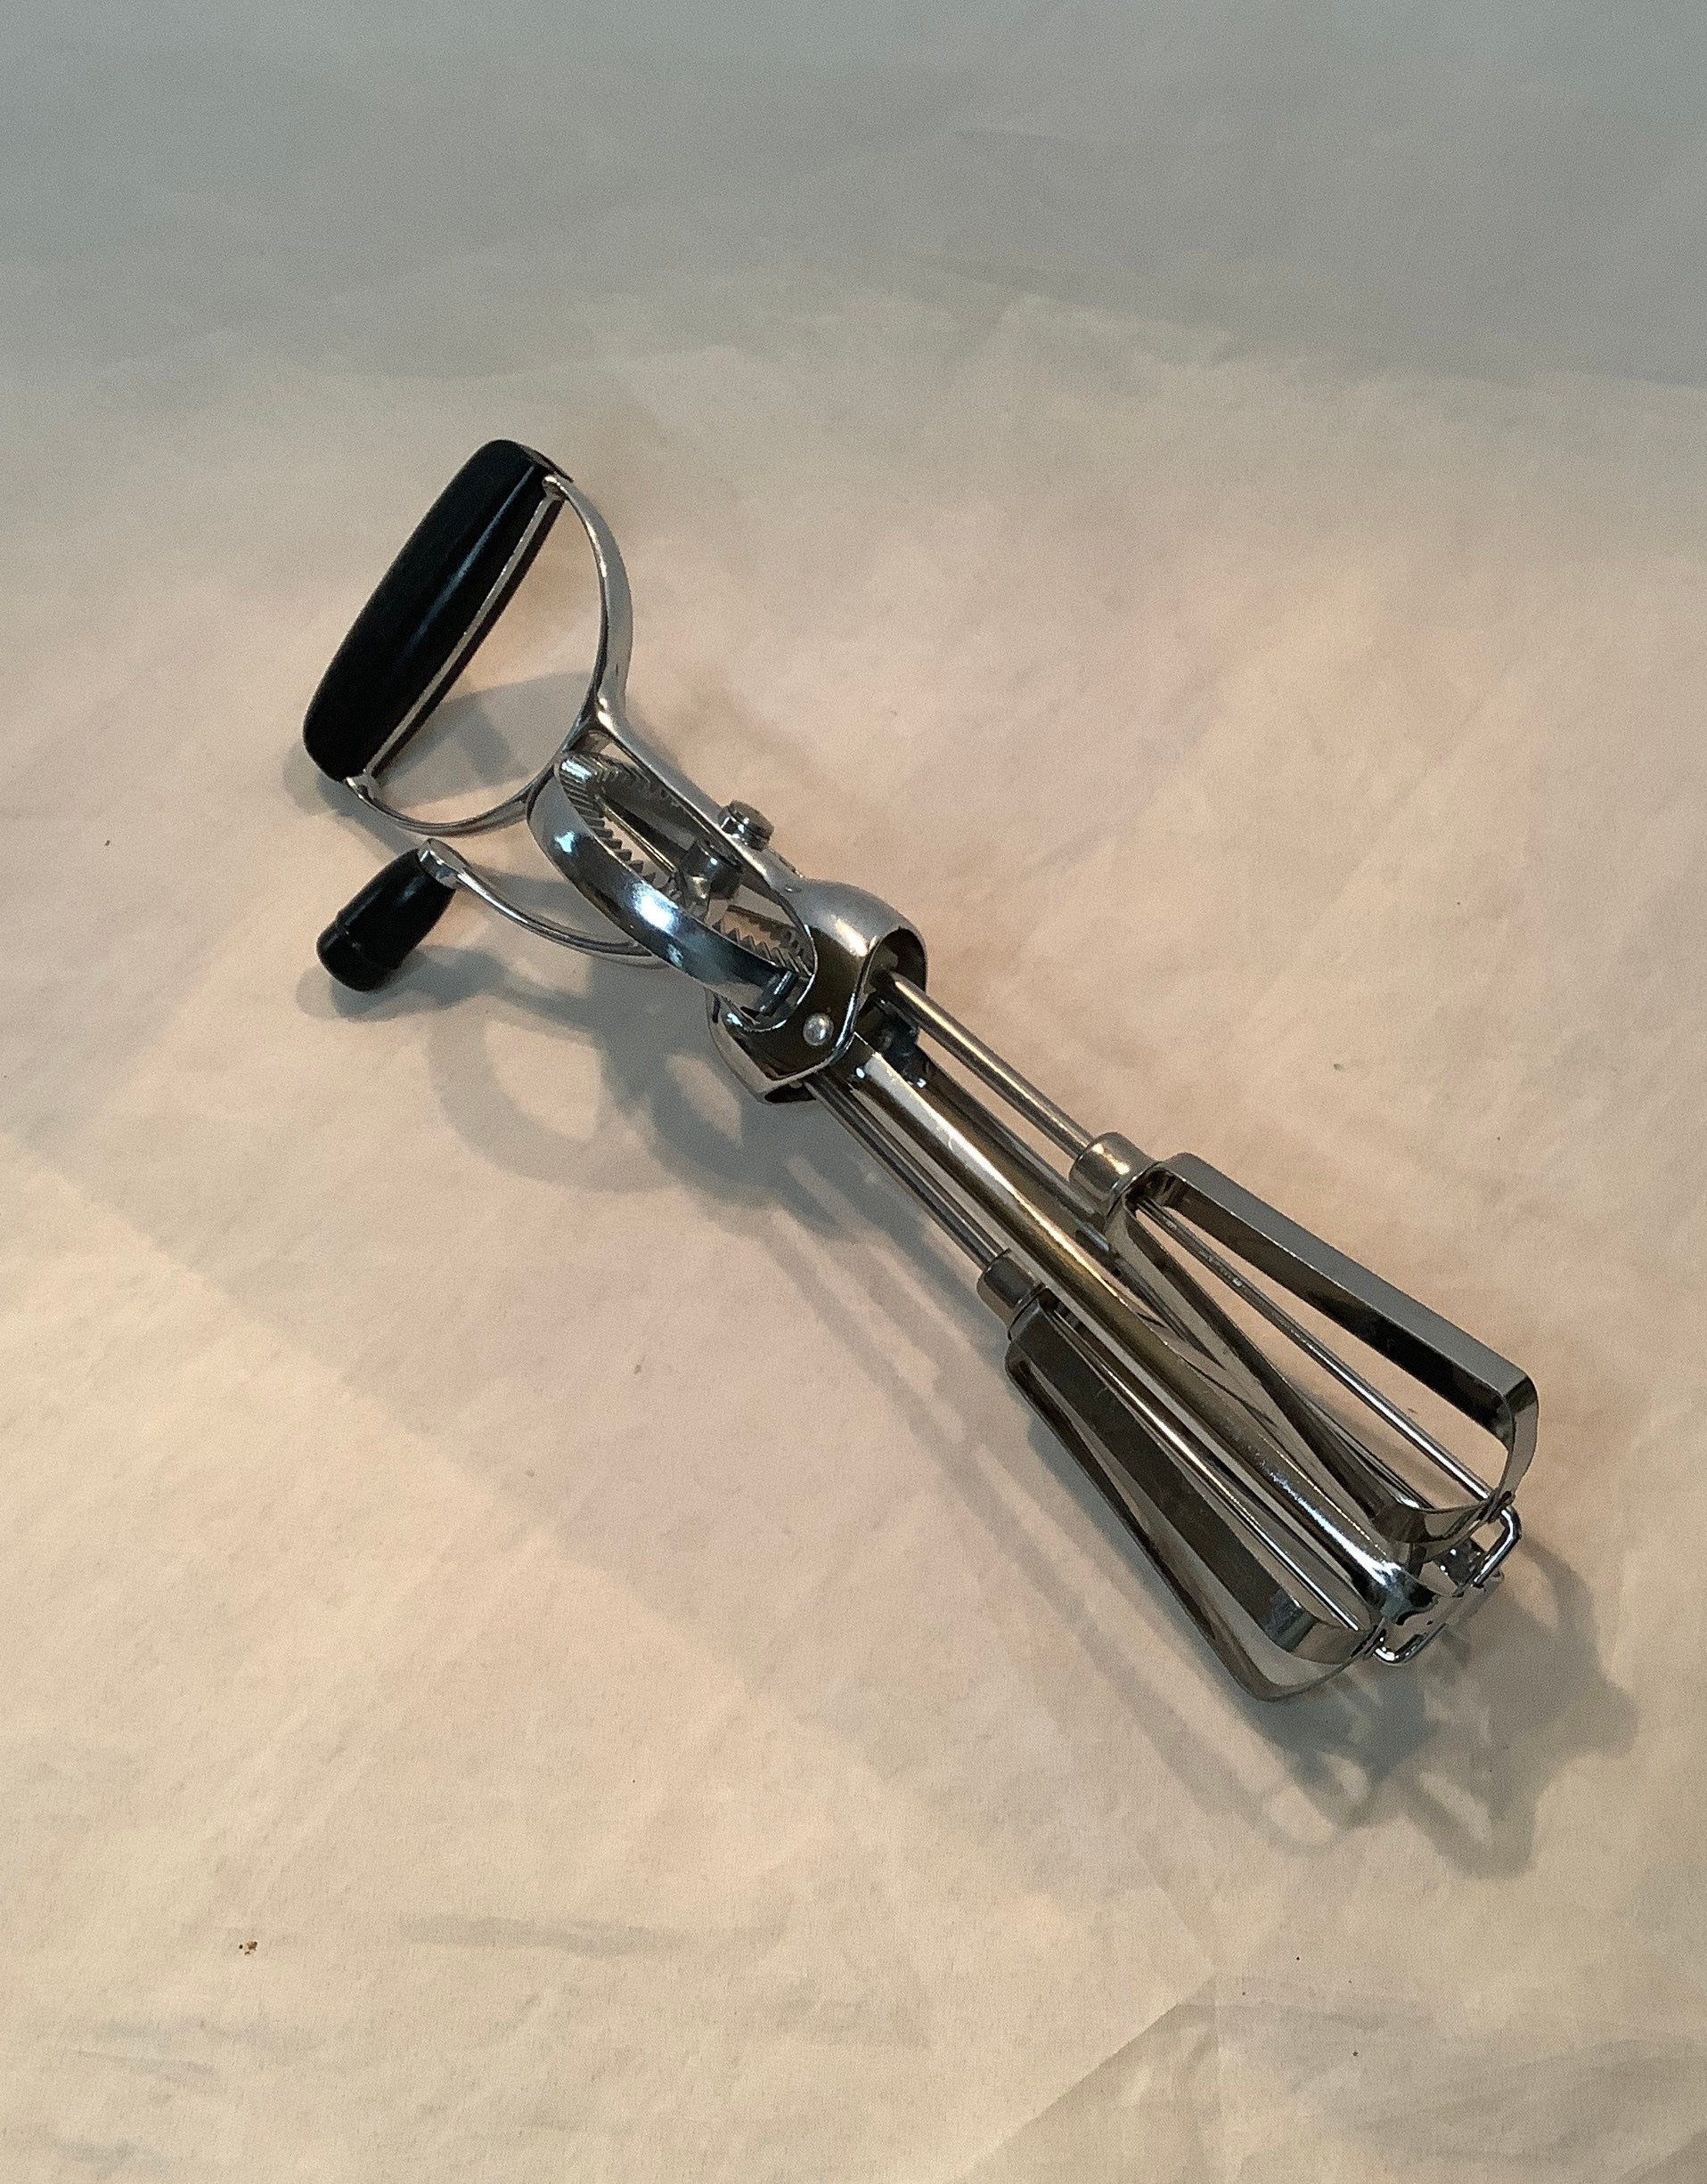 Ecko Best - Vintage Stainless Steel Manual Hand Mixer - Egg Beater - Black  USA